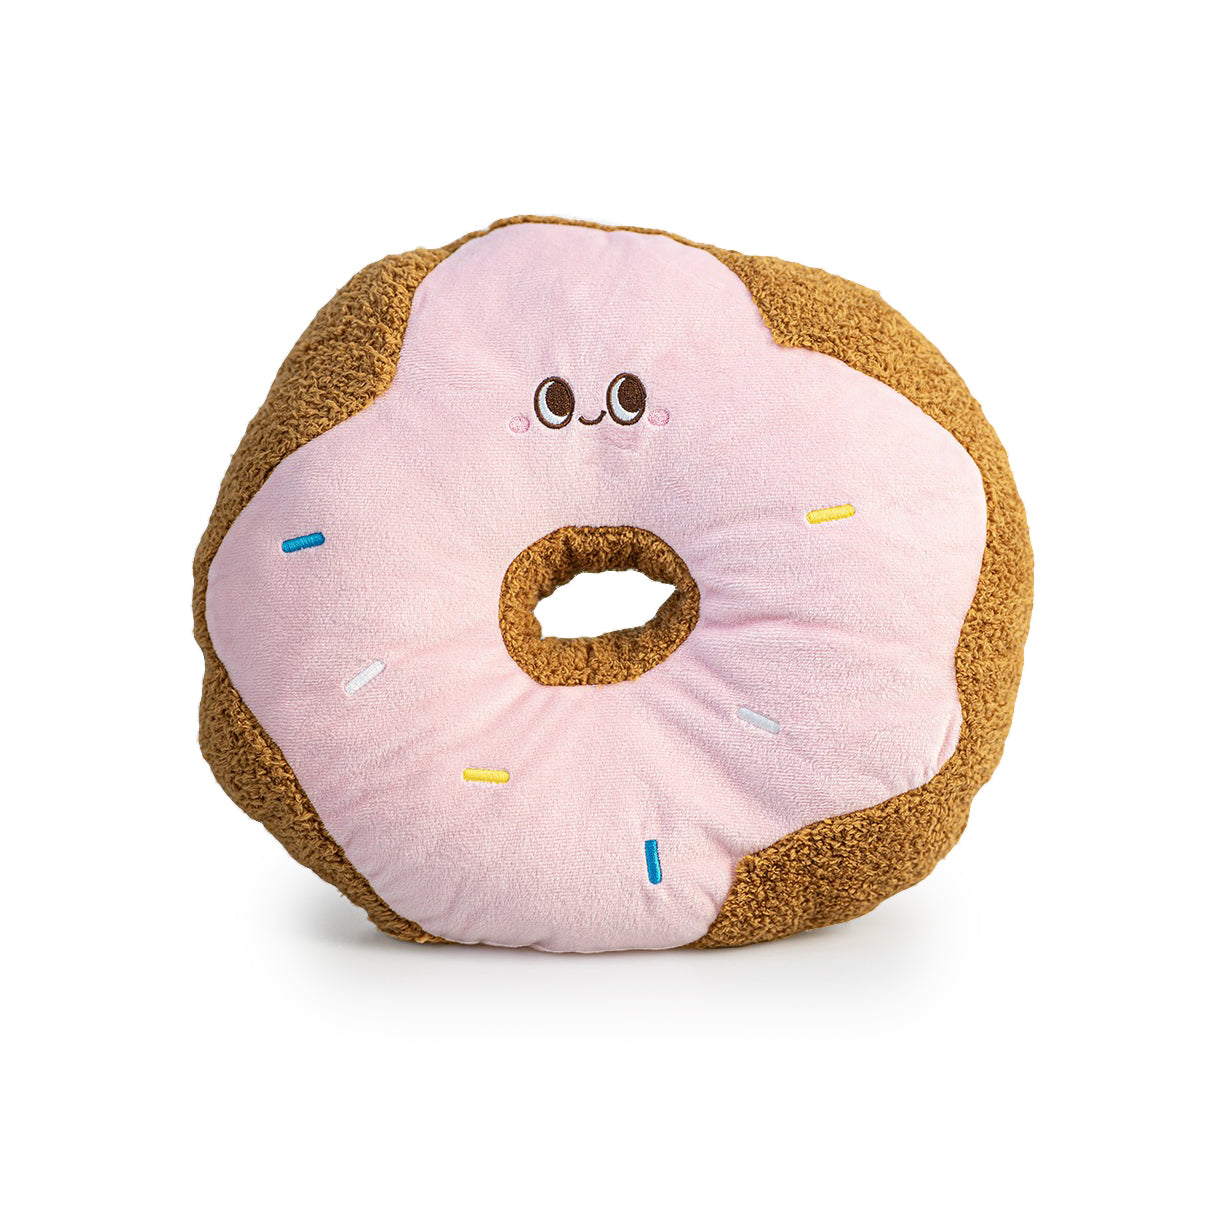 MINISO HAPPY FOODS COLLECTION 14IN. DONUT PLUSH TOY (PINK) 2014287211101 REGULAR PLUSH